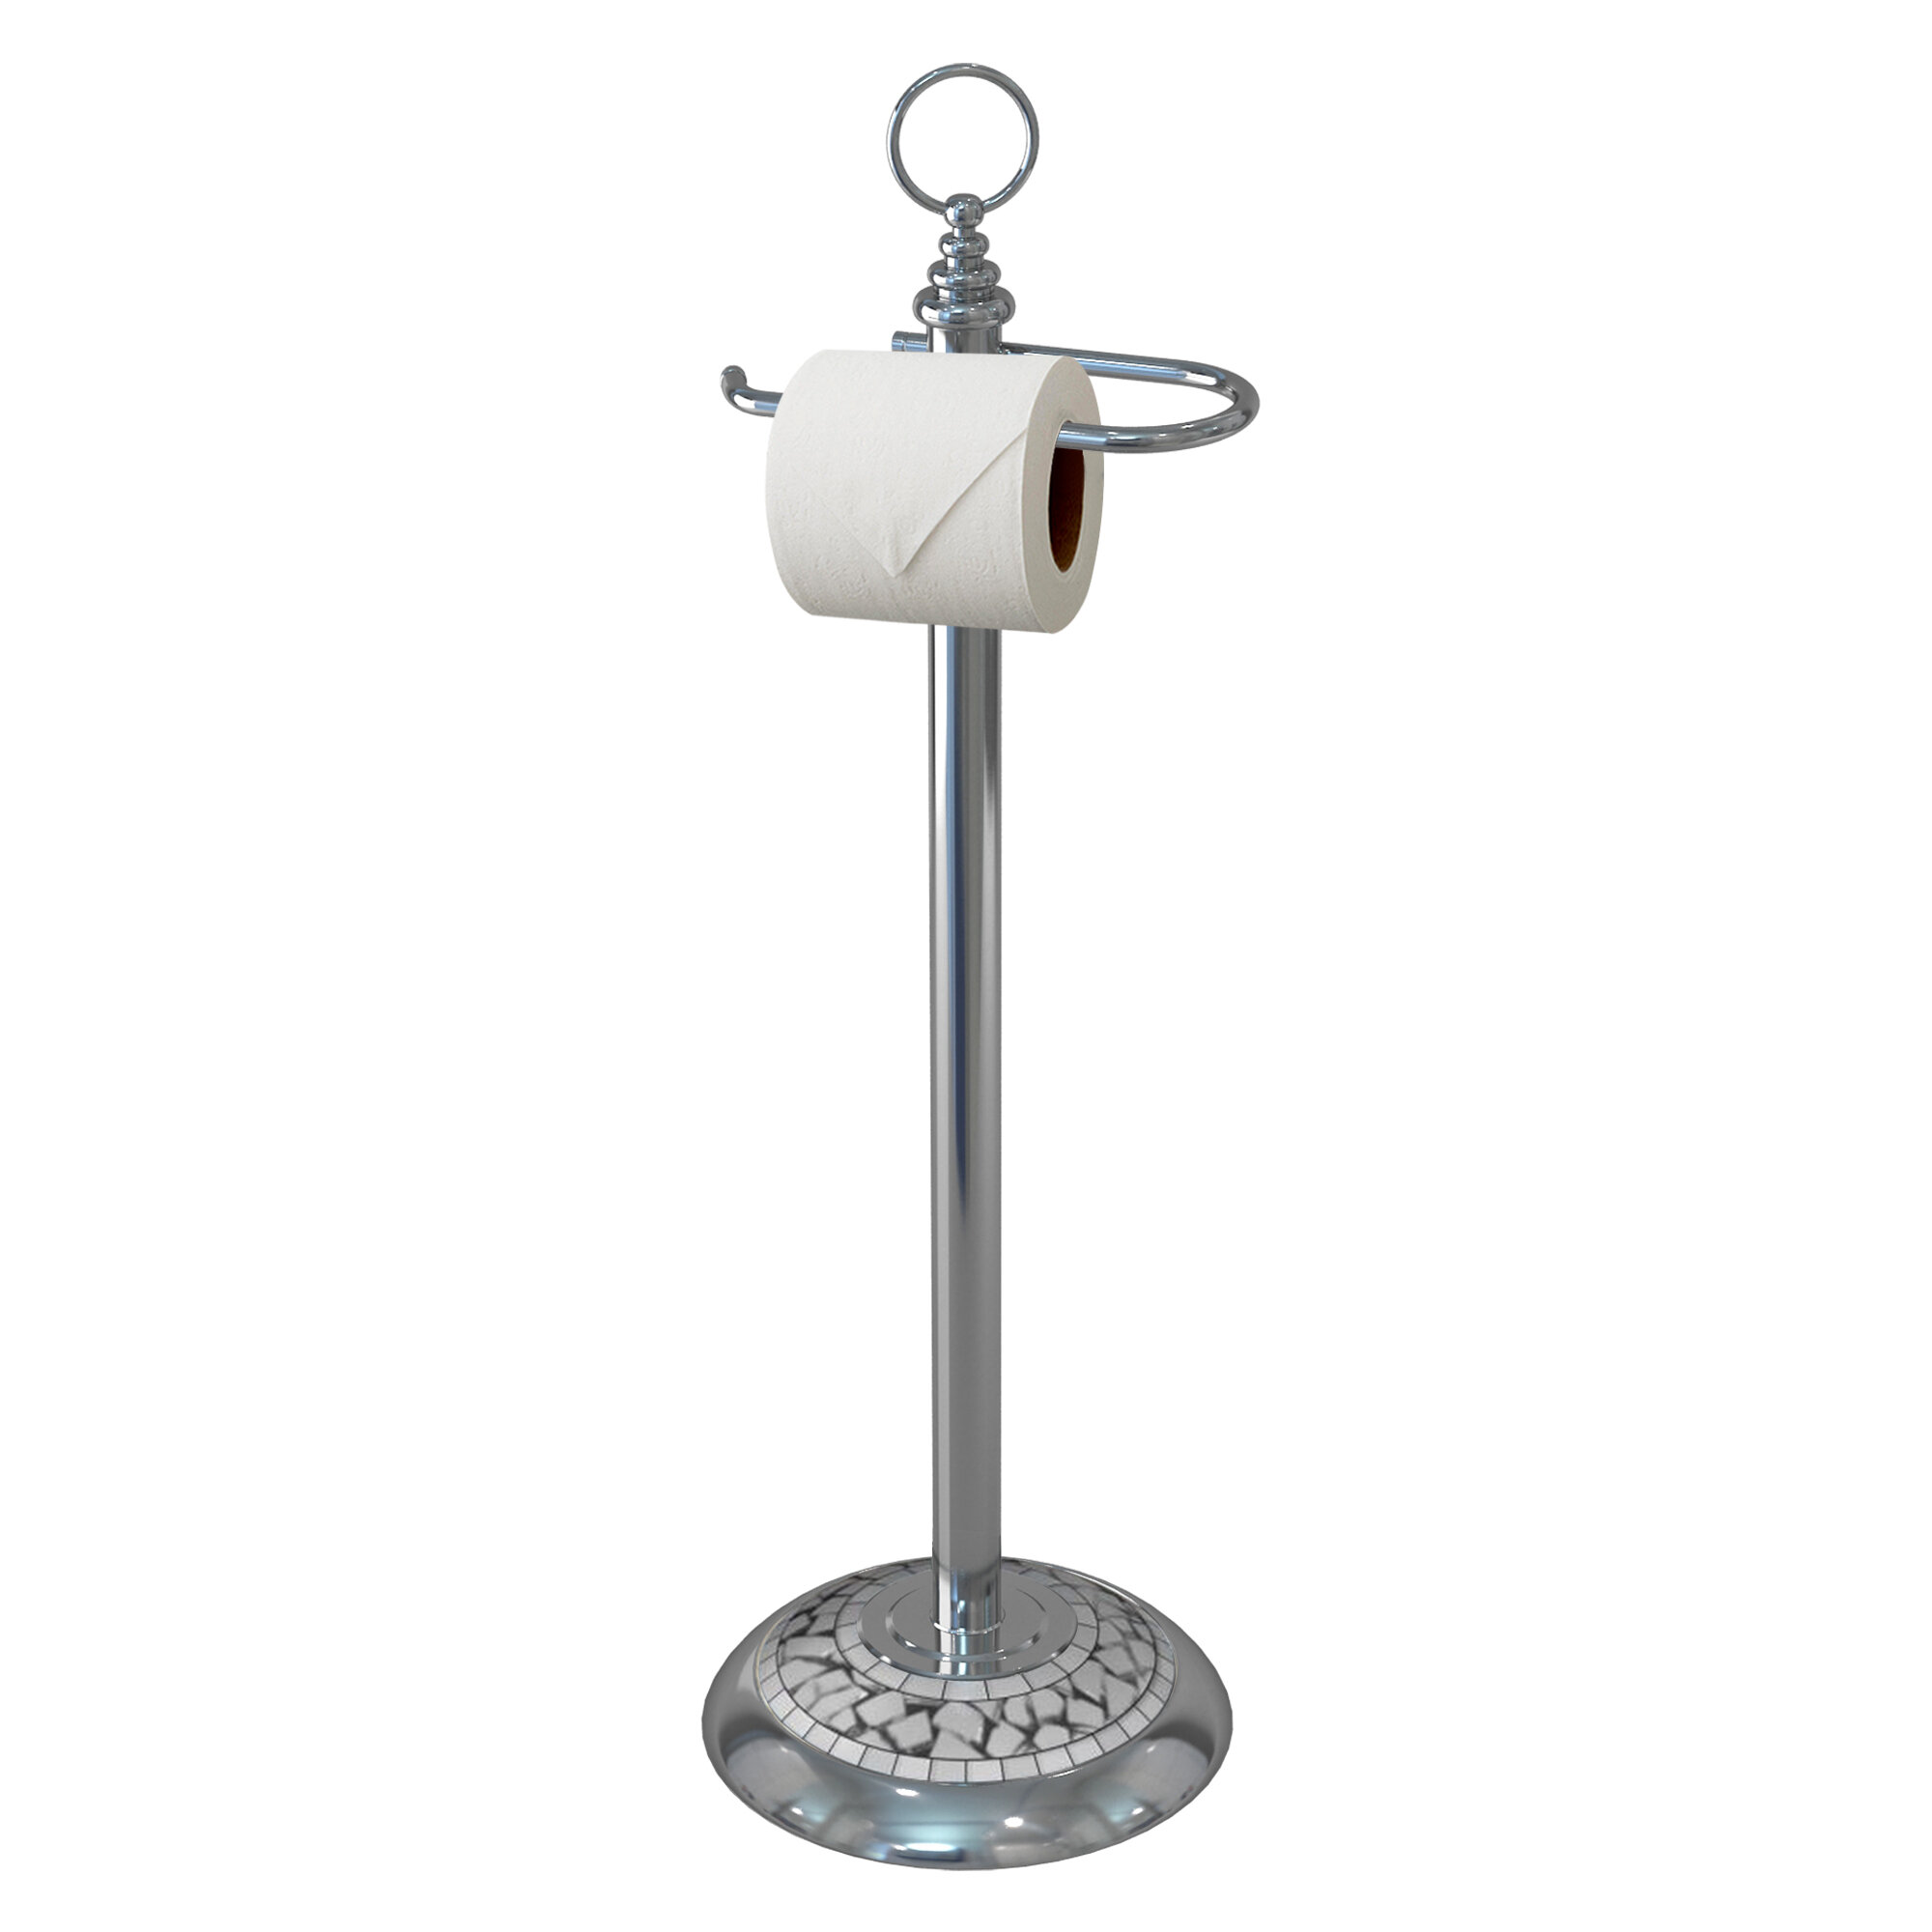 SunnyPoint Classic Free Standing Toilet Tissue Paper Roll Holder Stand;  Brush Chrome 